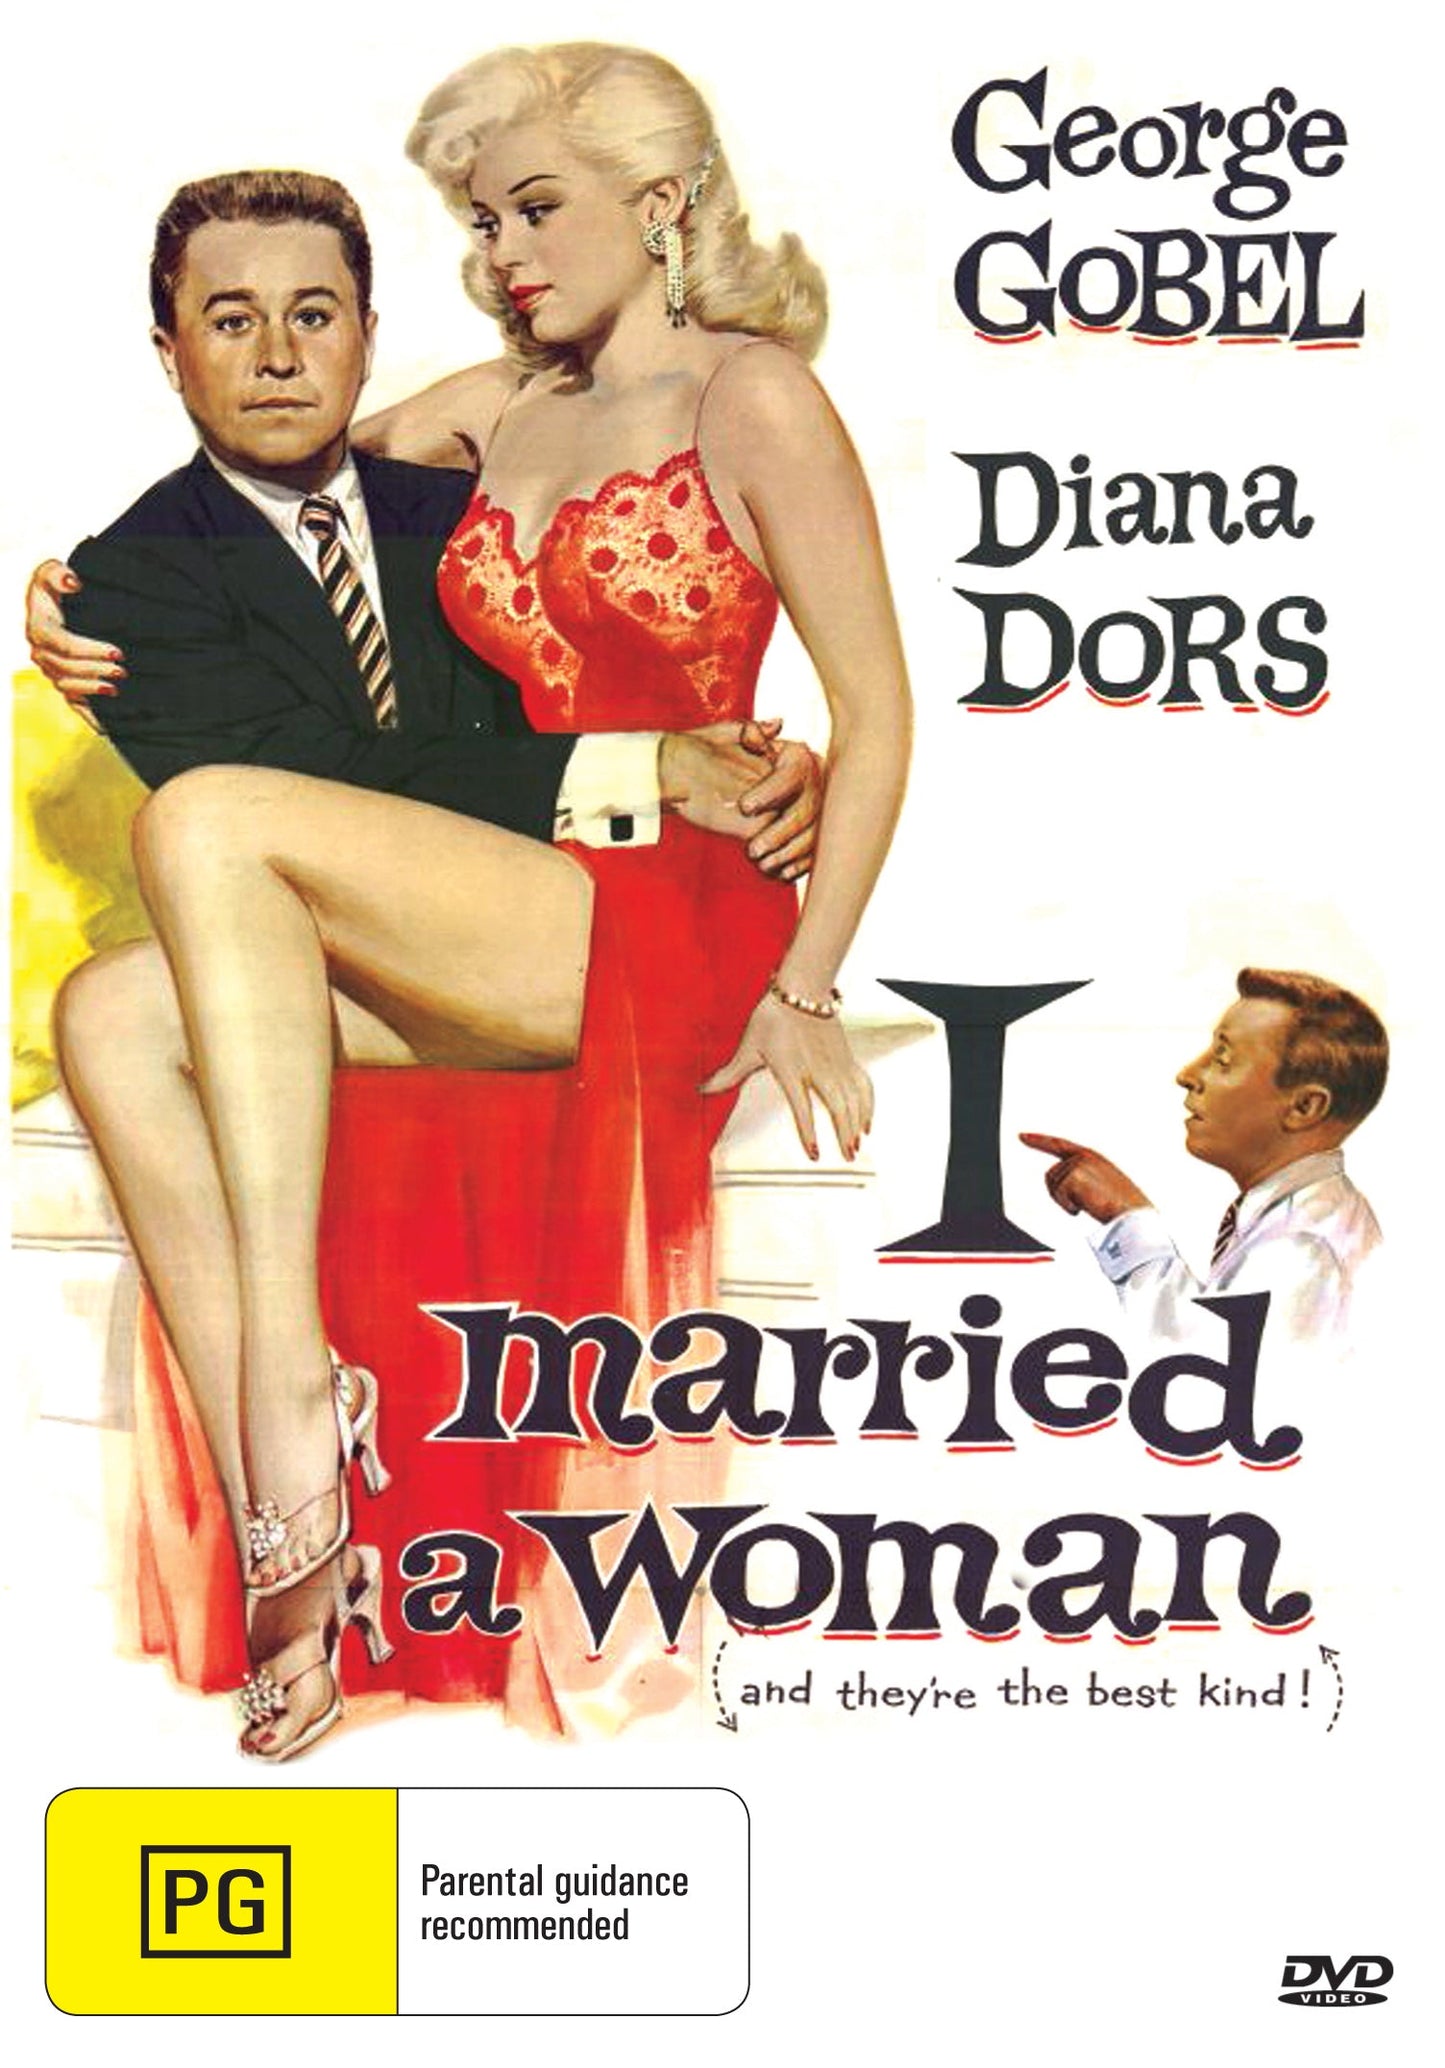 Buy Online I Married a Woman (1958)  - DVD - George Gobel, Diana Dors | Best Shop for Old classic and hard to find movies on DVD - Timeless Classic DVD